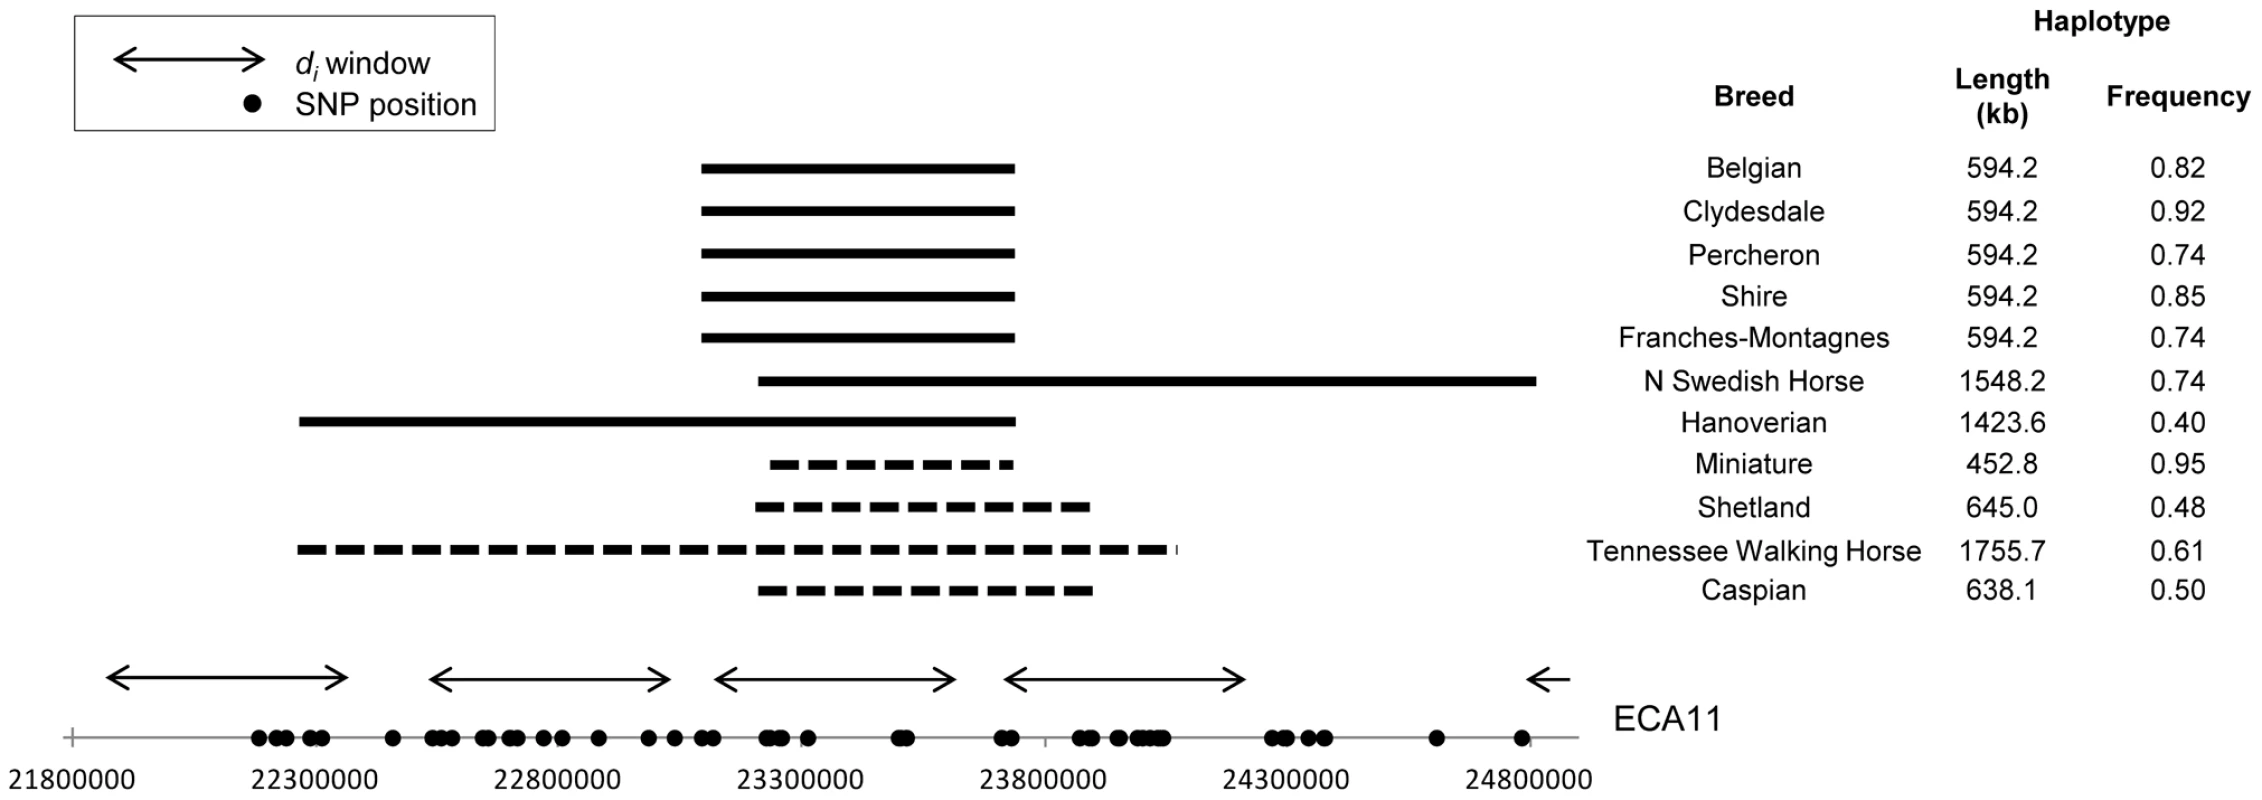 Frequency and location of extended haplotypes on ECA11 in draft breeds and the Miniature.